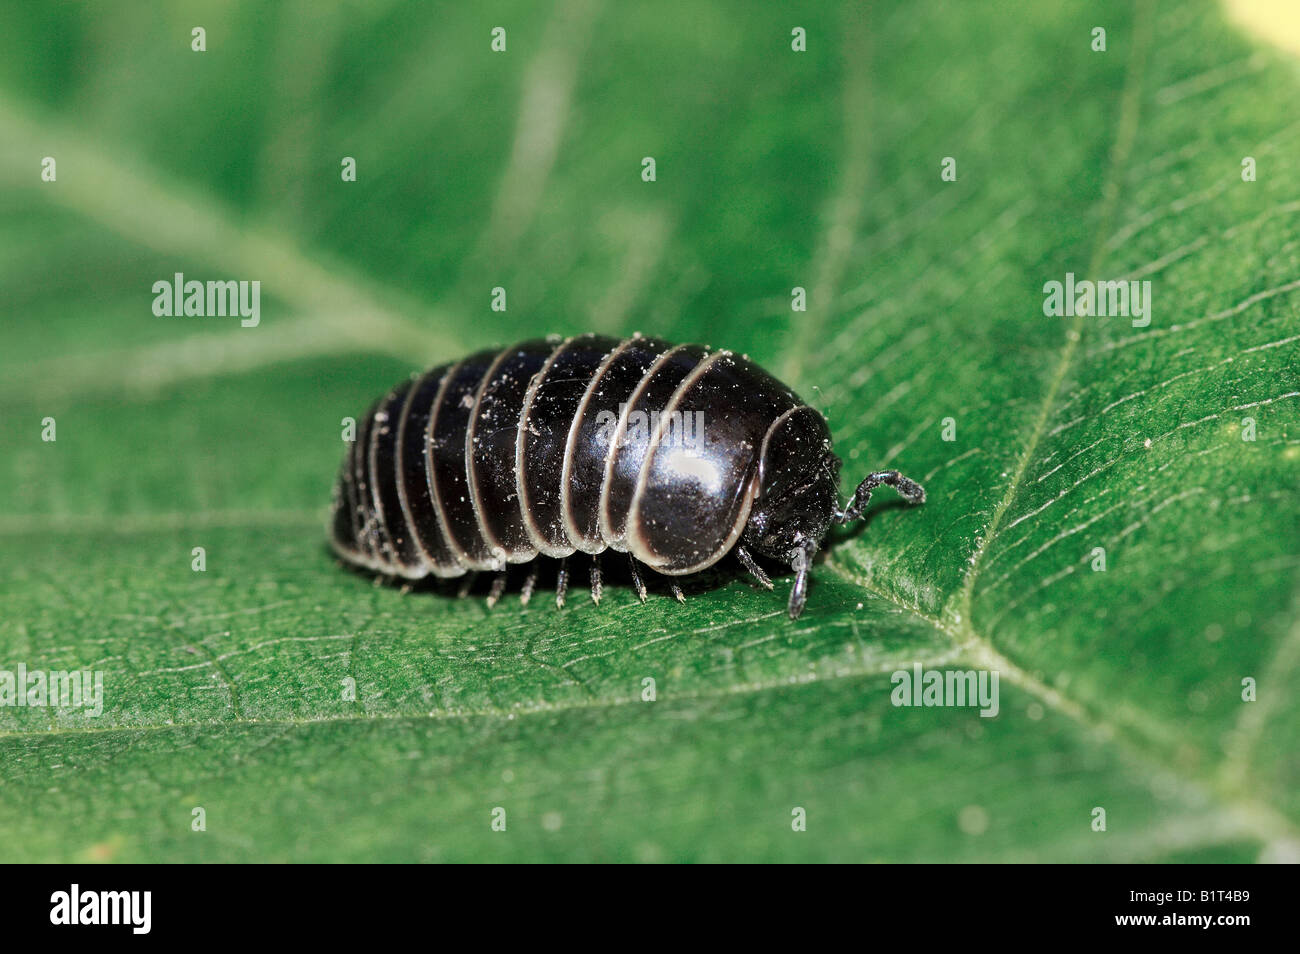 pill millipede on leaf Stock Photo